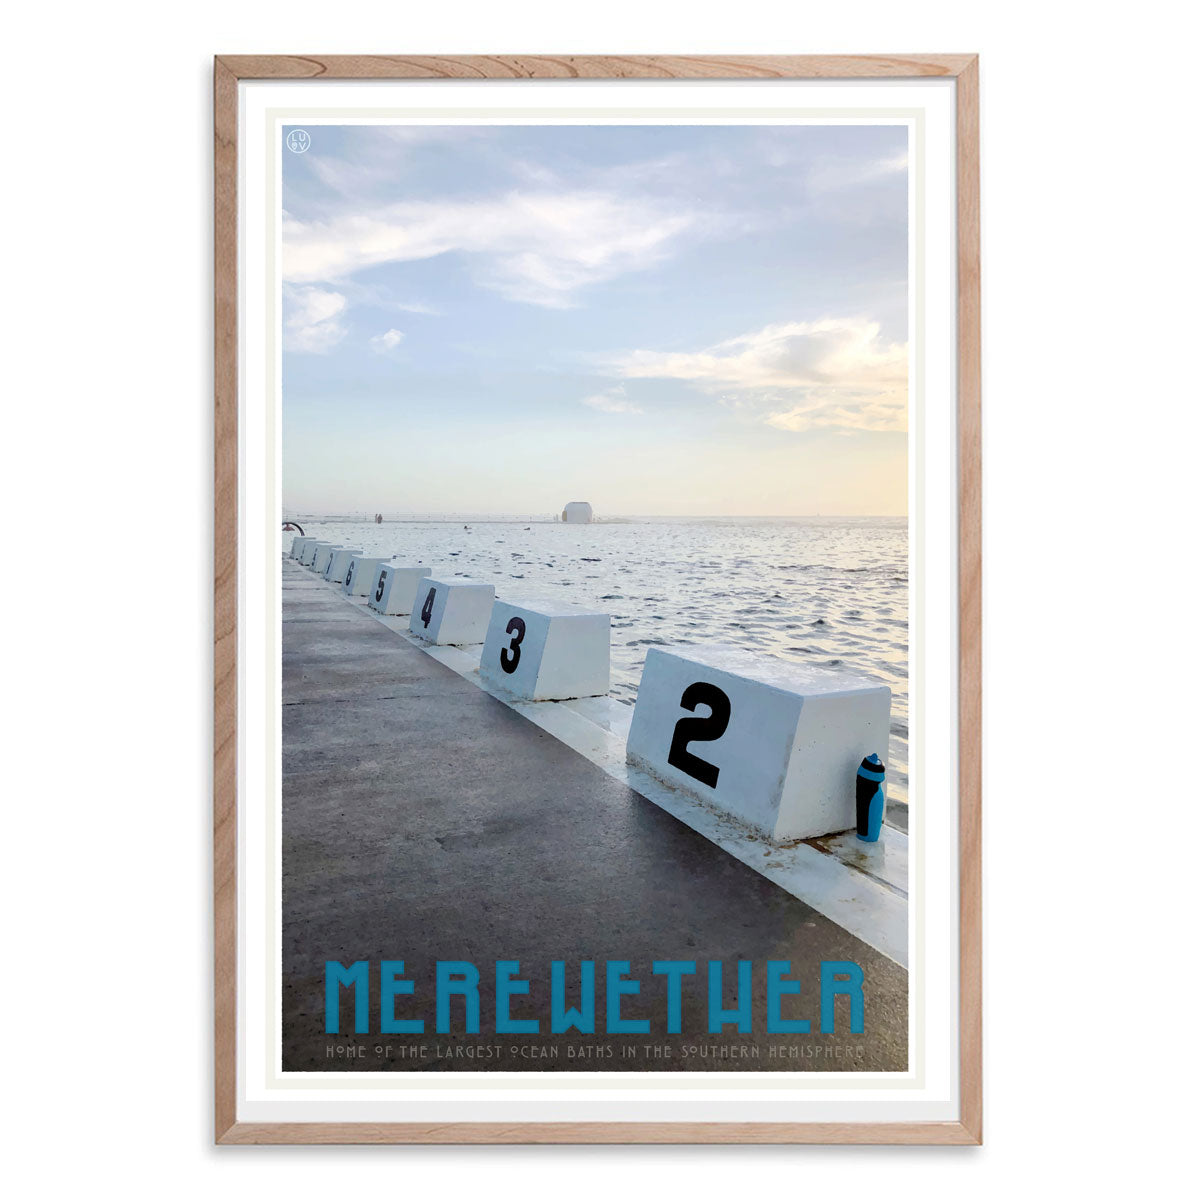 Merewether Pool vintage travel poster in oak frame by places we luv